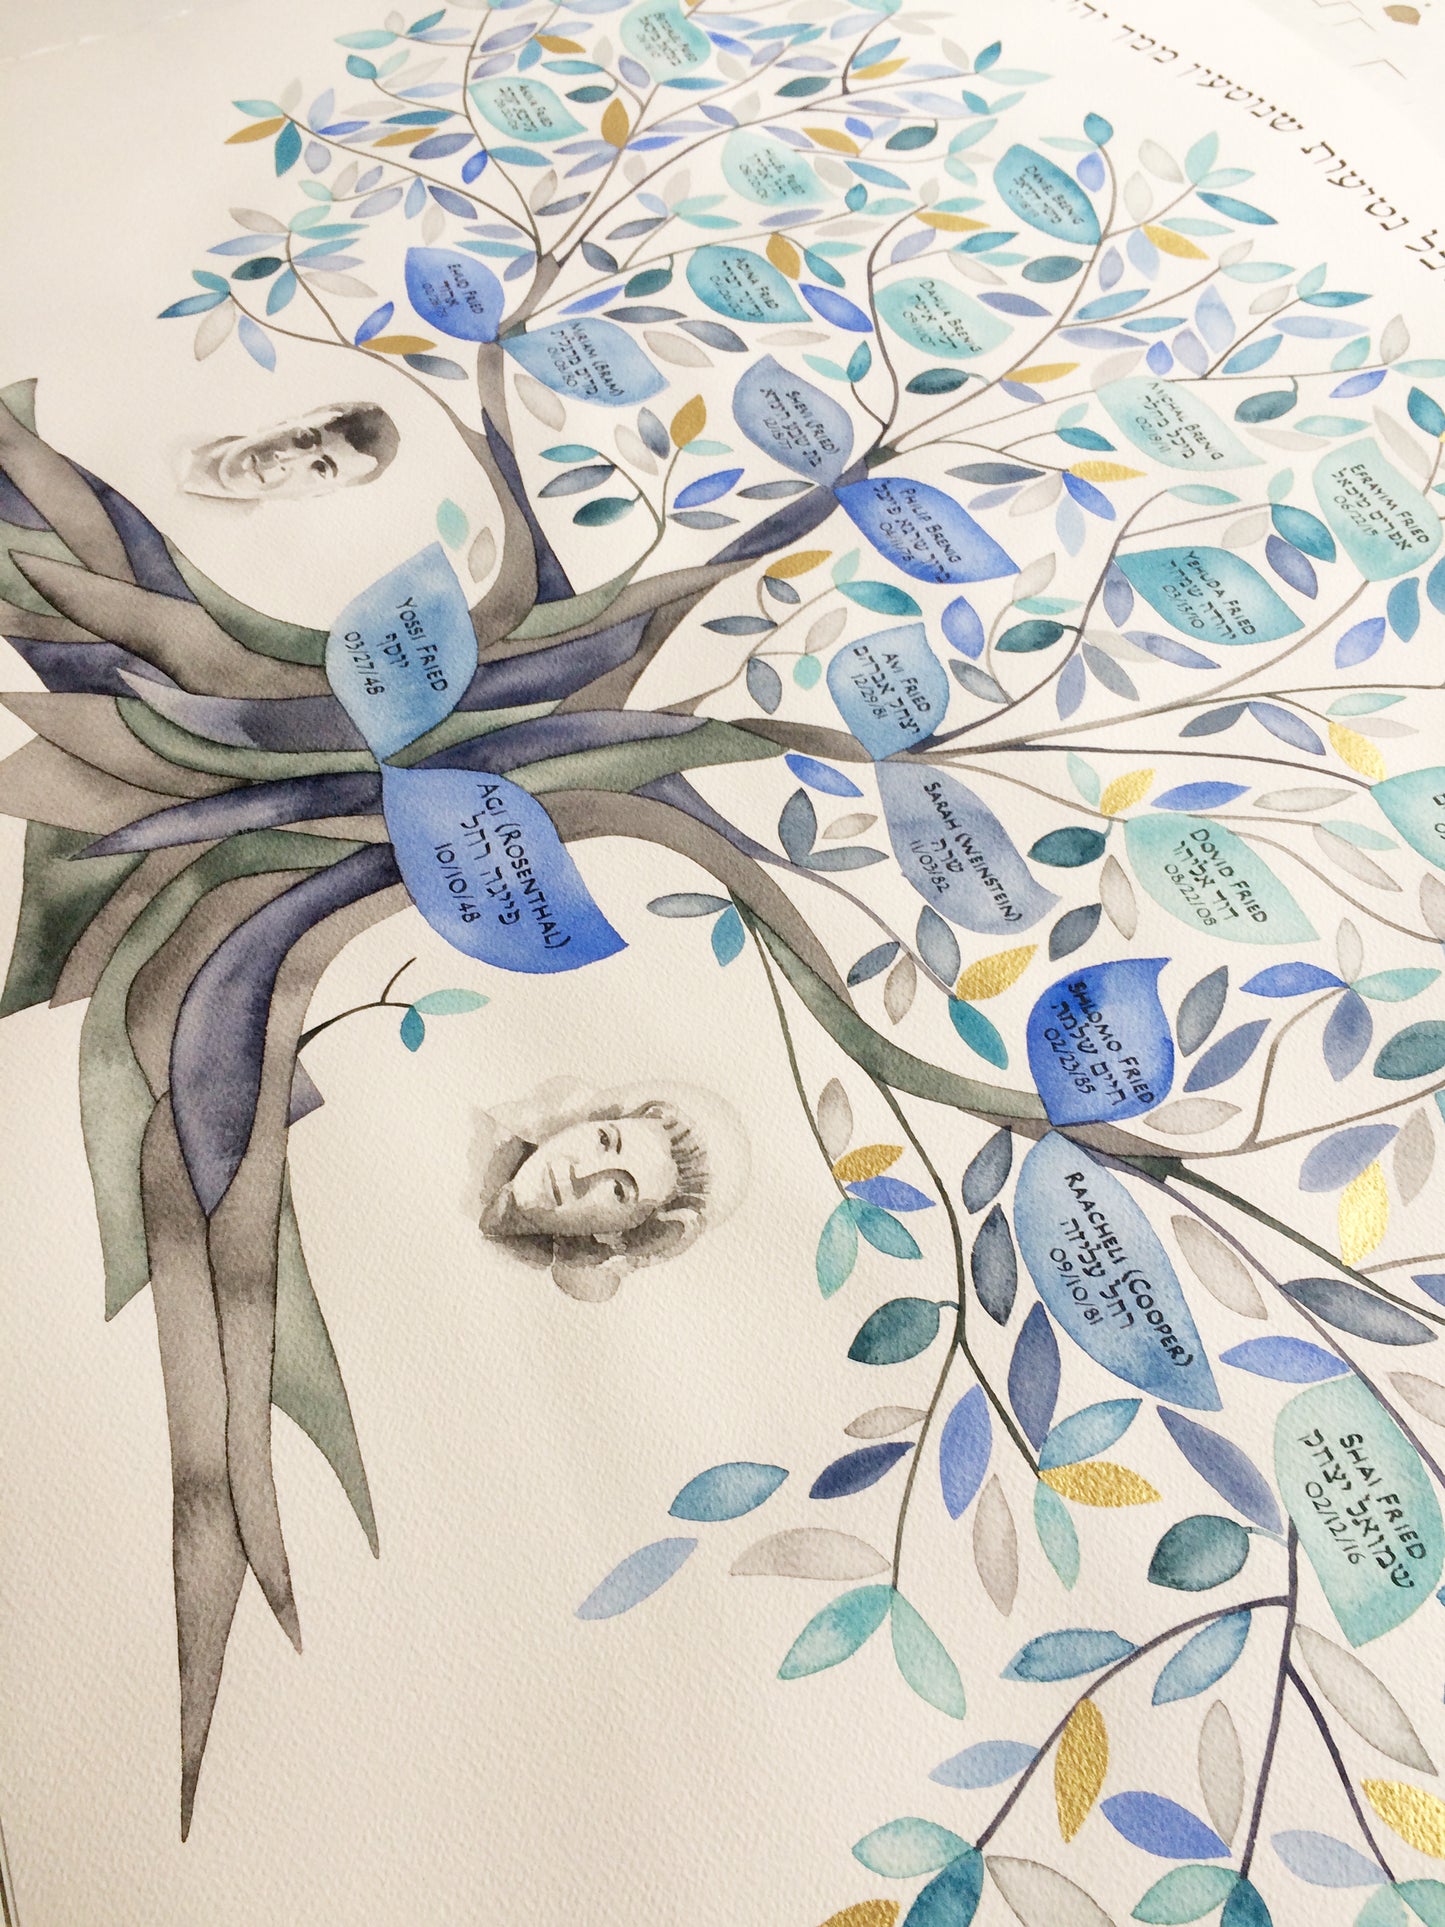 Custom Ancestry Tree watercolor painting with family portraits